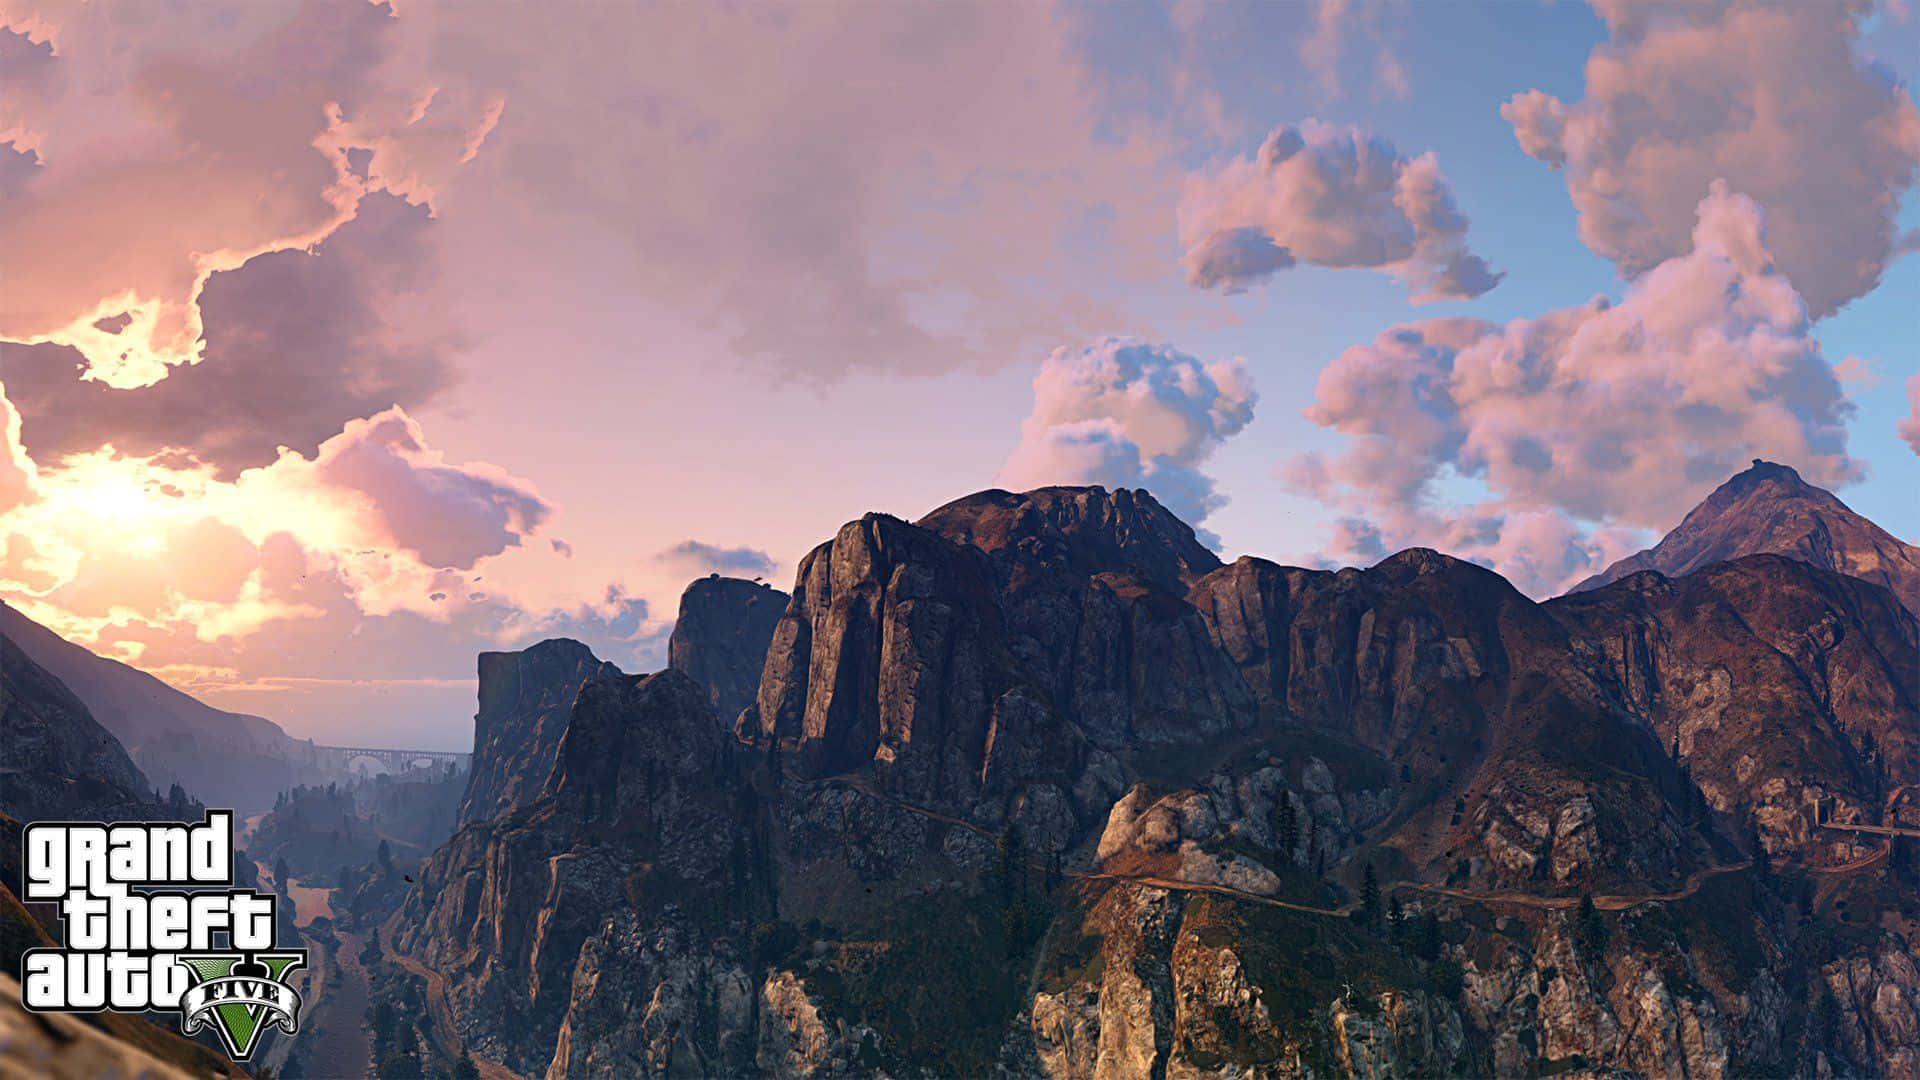 Join the wildly popular virtual world of Grand Theft Auto V